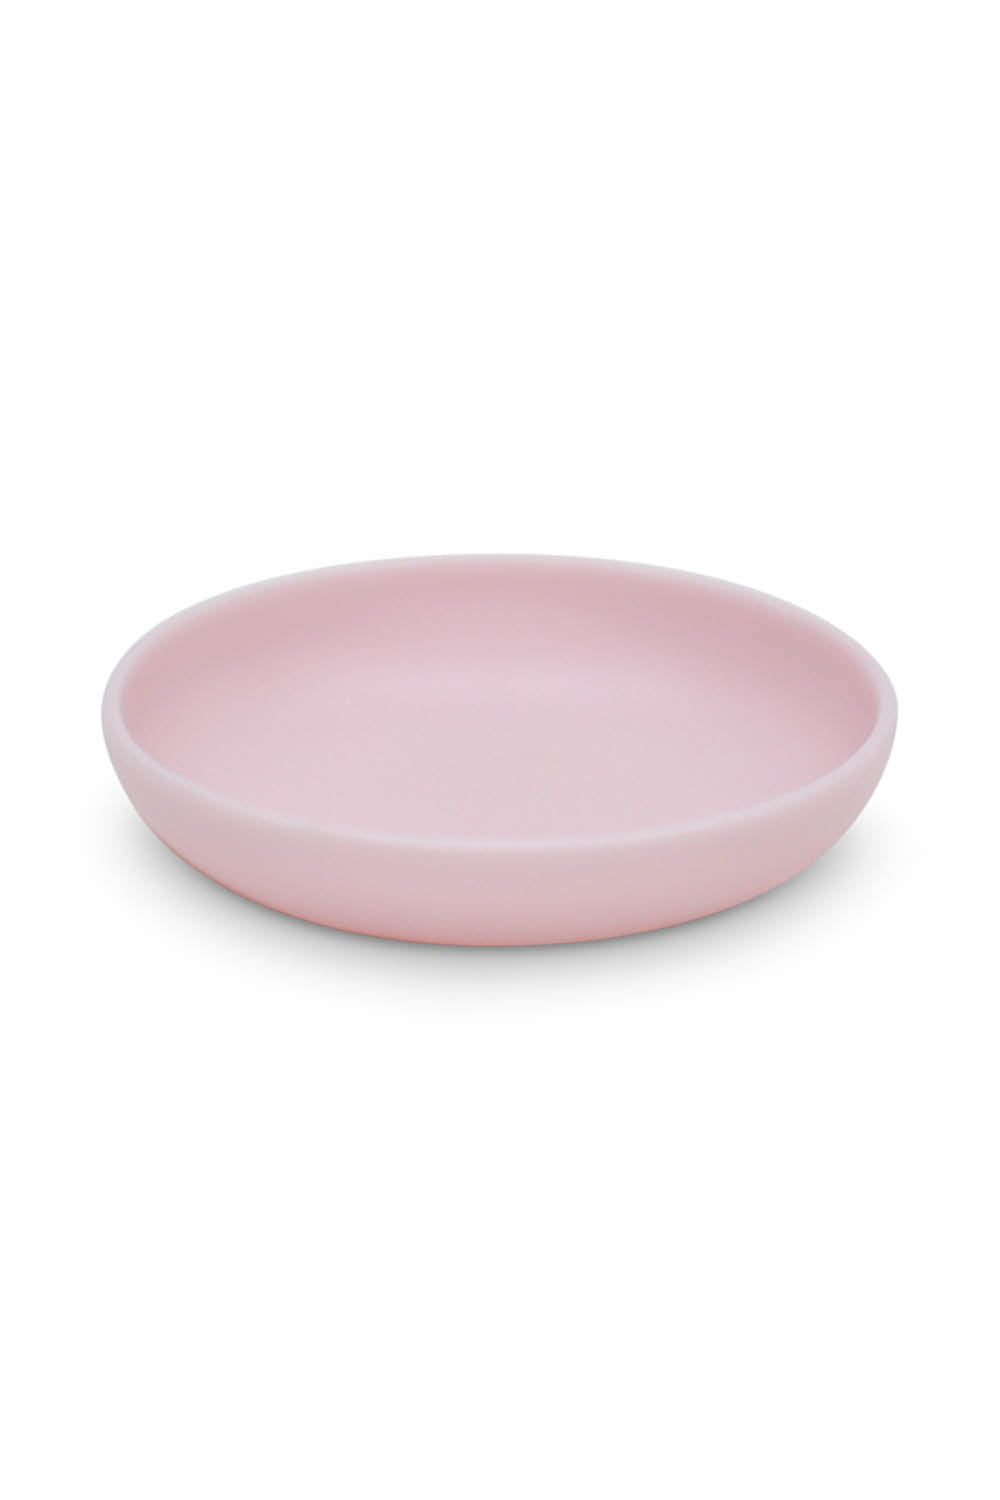 MODERN Small Plate in Pale Rose